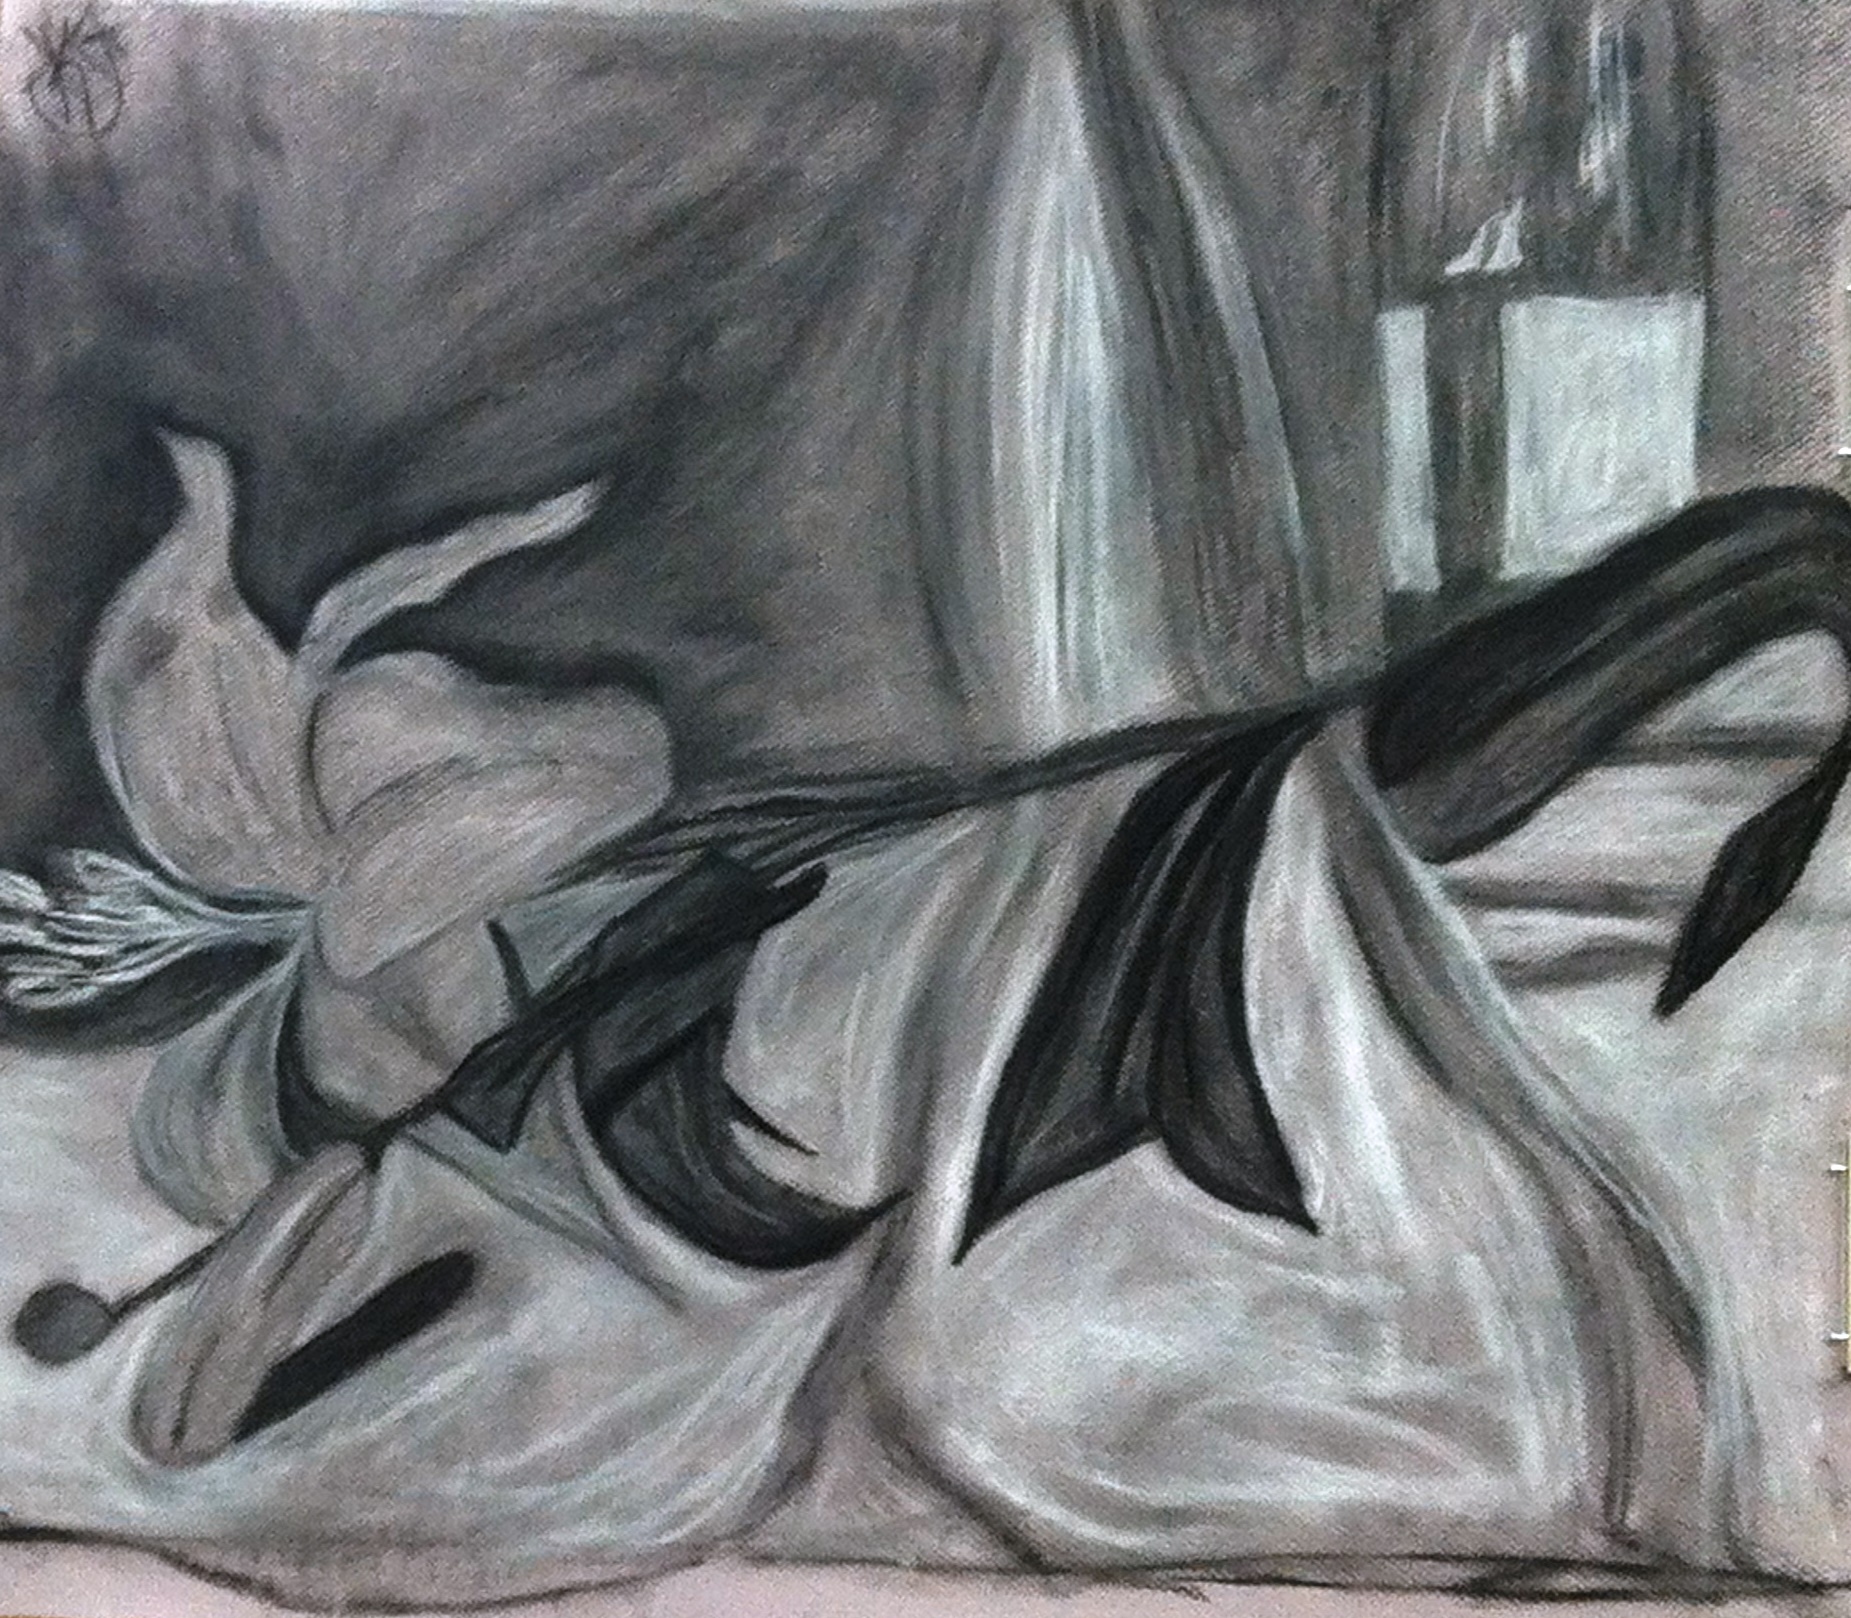 Lily on fabric: Charcoal - 2012